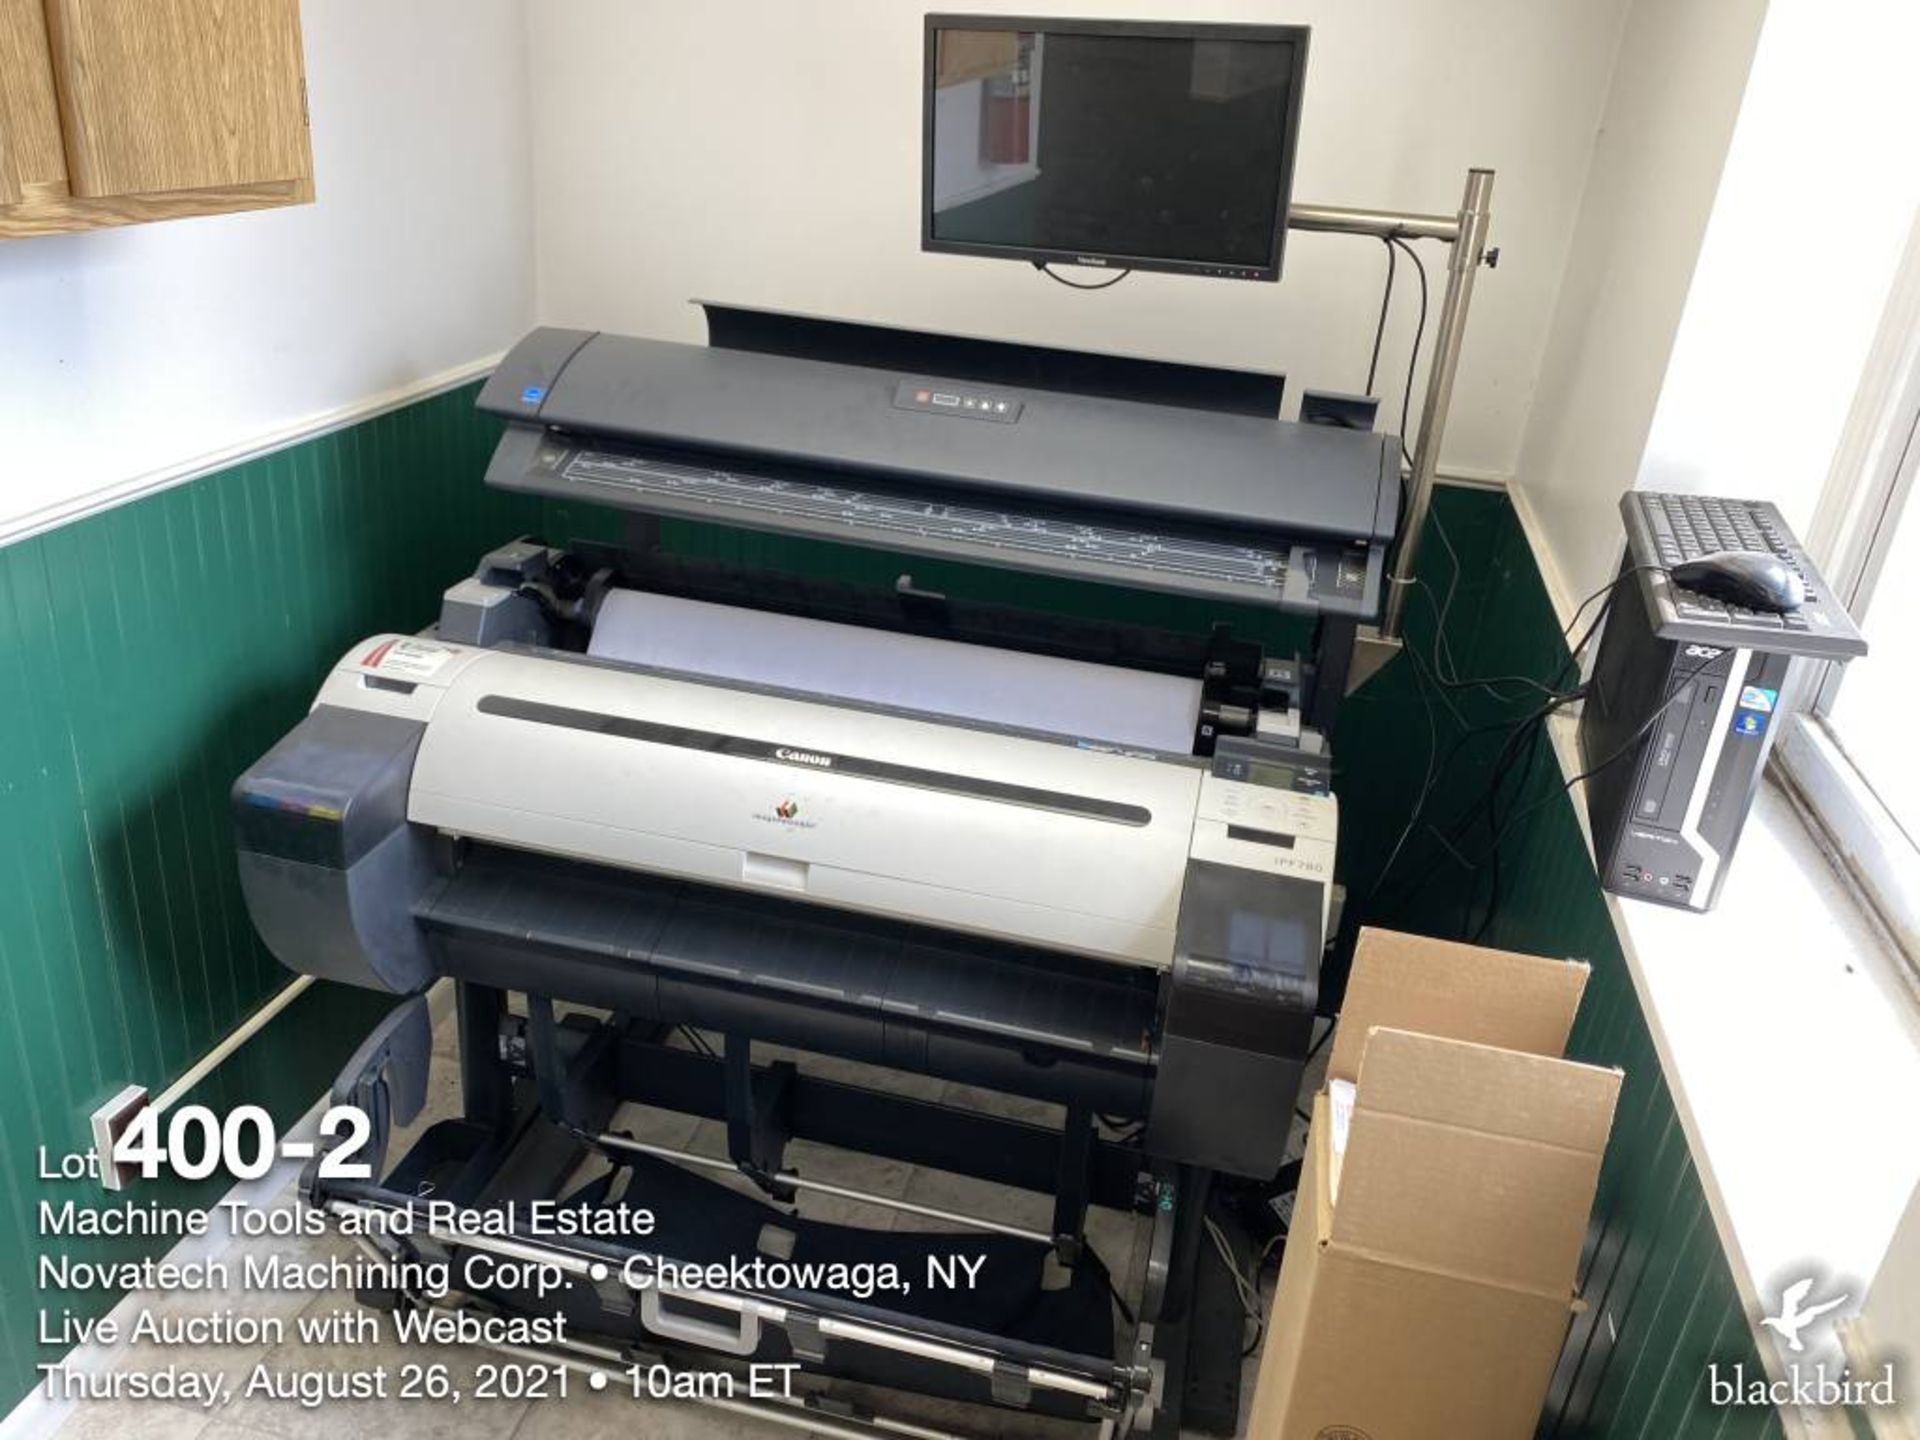 Large format printer, scanner, with computer and touch screen monitor - Image 3 of 14